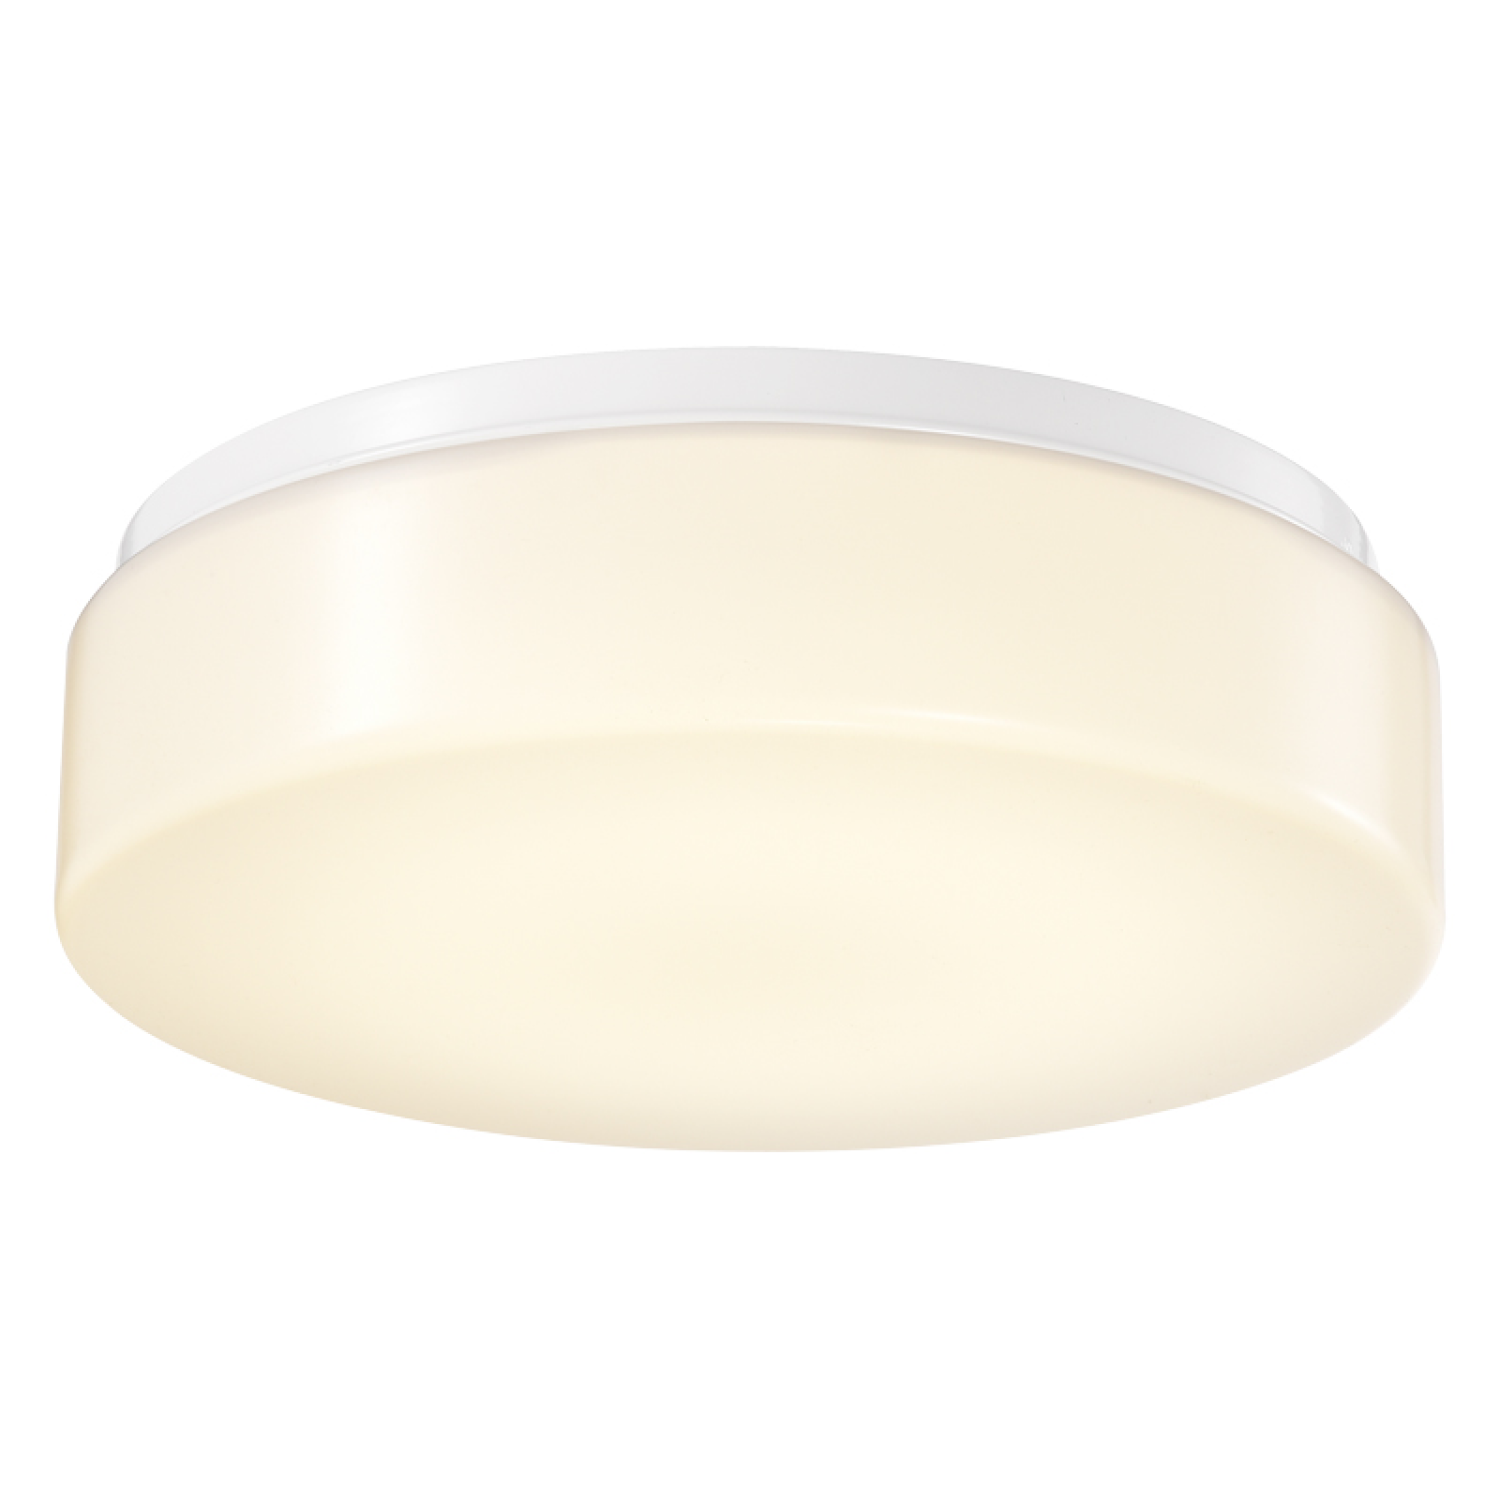 11 Inch Round LED Ceiling Light, White, Surface Mount, 1600 Lumens